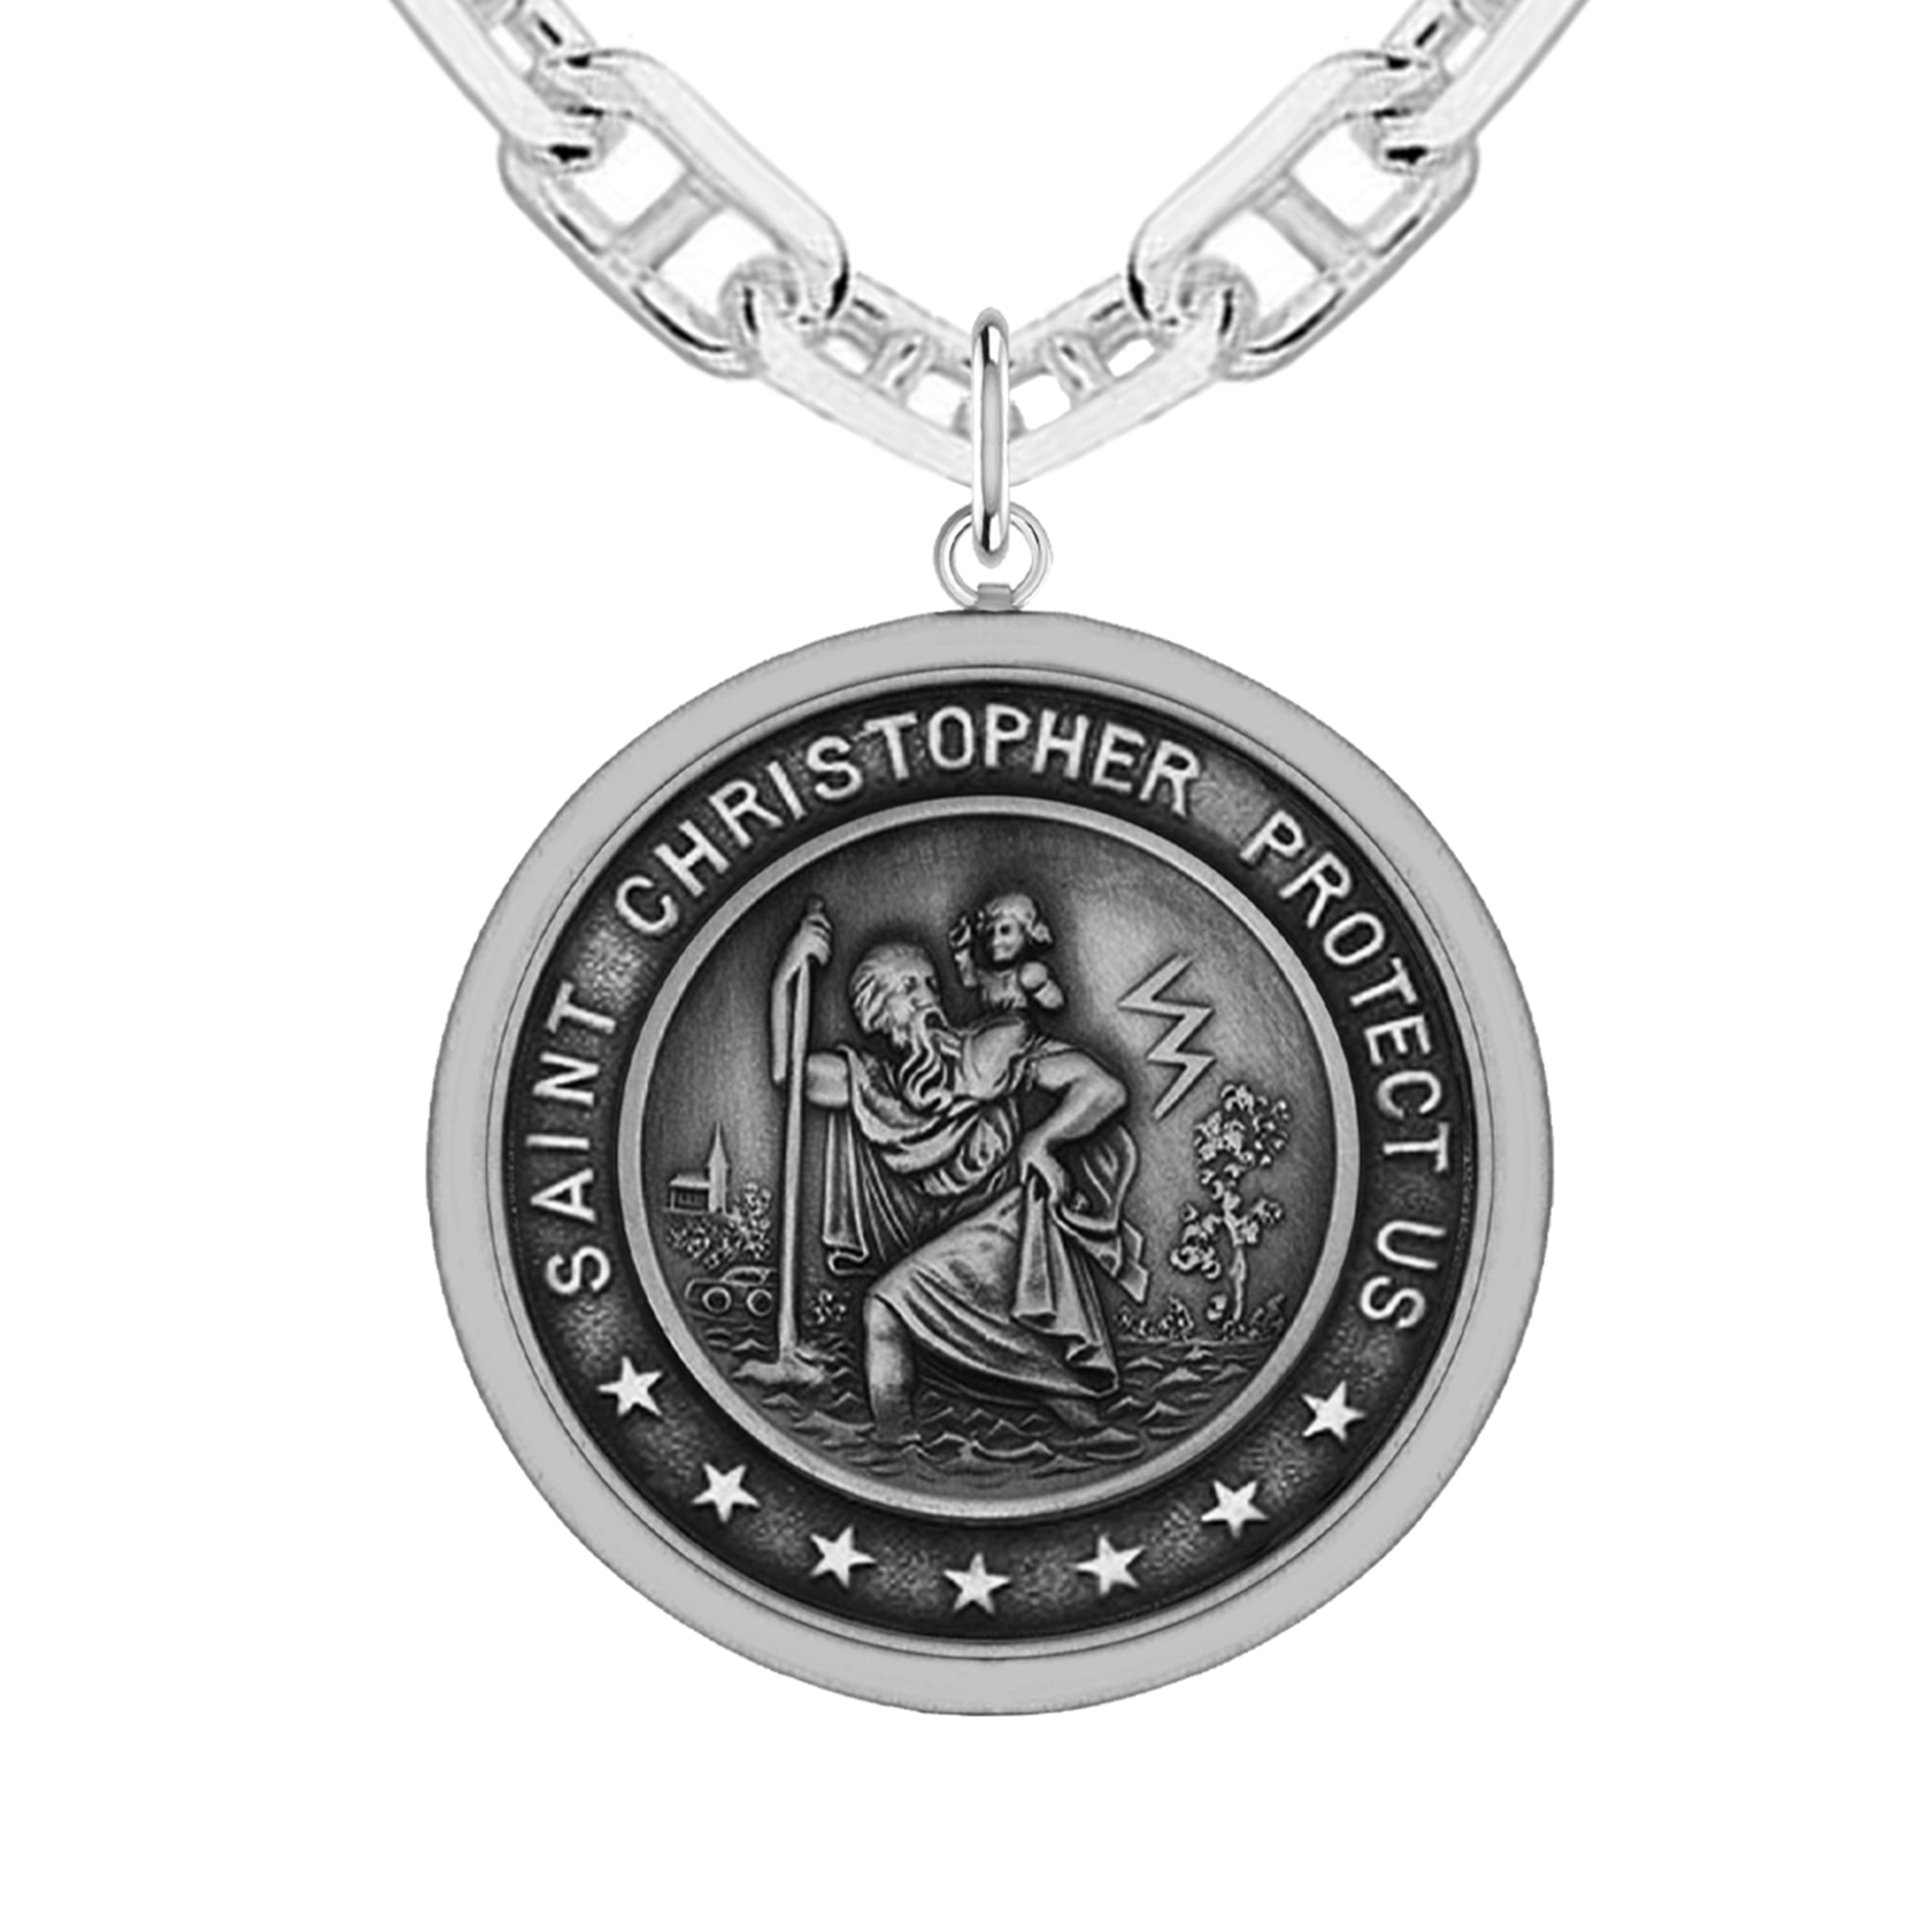 Christopher Protect Us Medal Charm Pendant .925 Sterling Silver St 